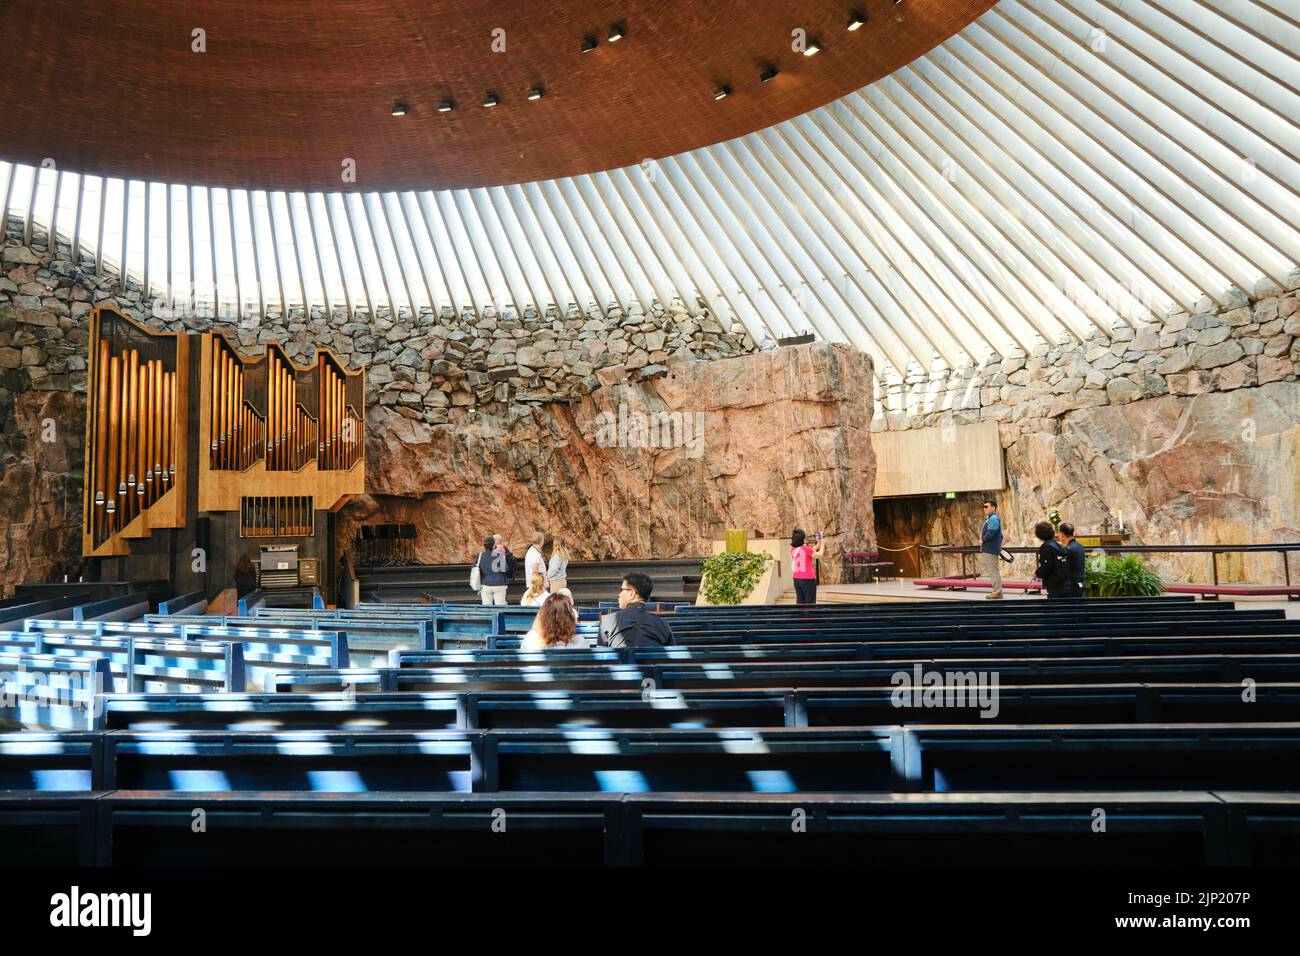 Helsinki, Finland - 10 August 2022: Interior of famous Temppeliaukio church built directly into solid rock with walking tourists in Helsinki, Finland Stock Photo